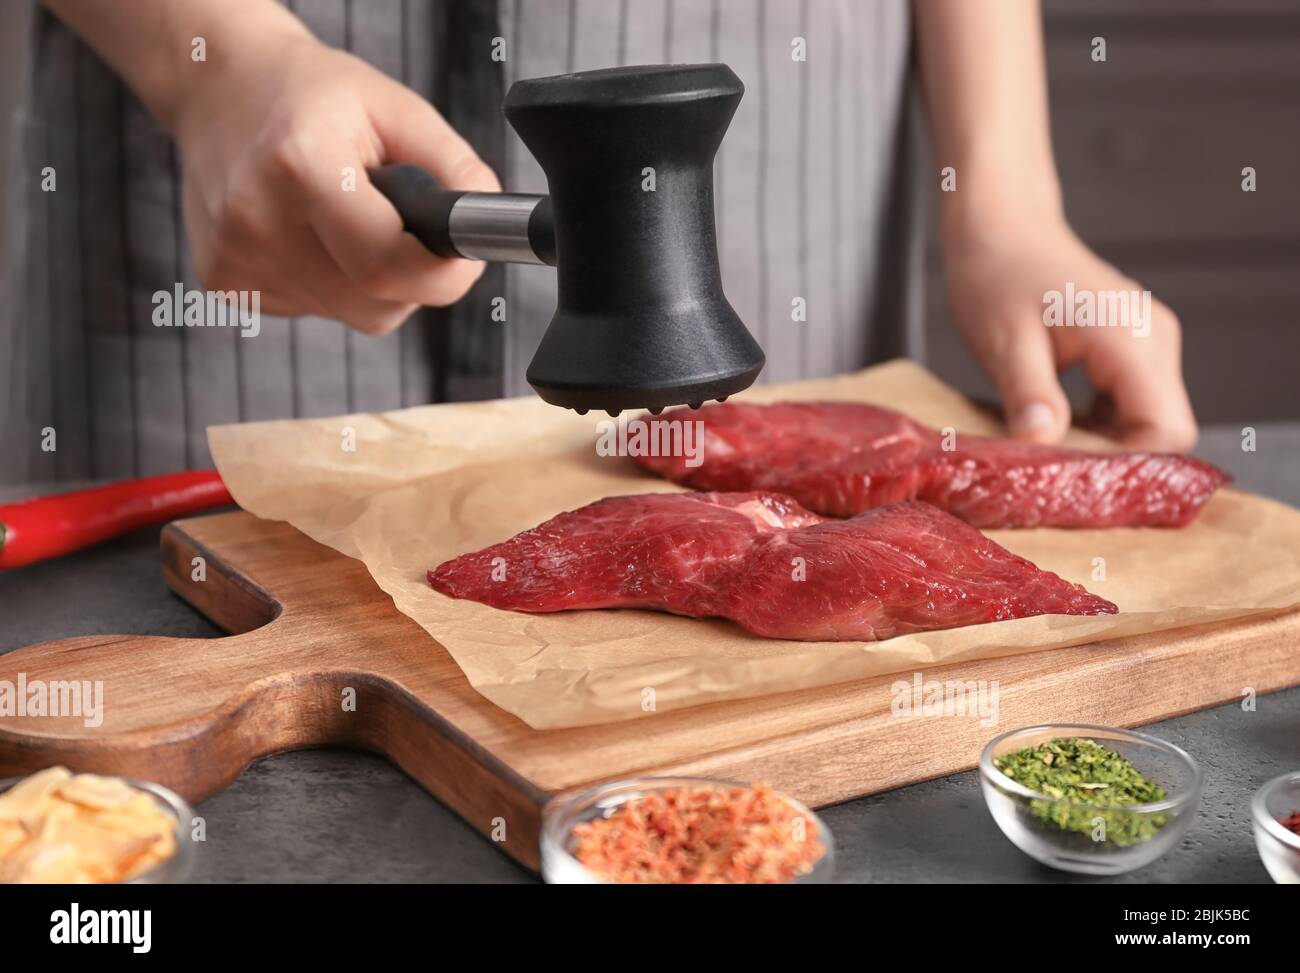 Woman beating raw steak with meat mallet in kitchen Stock Photo - Alamy